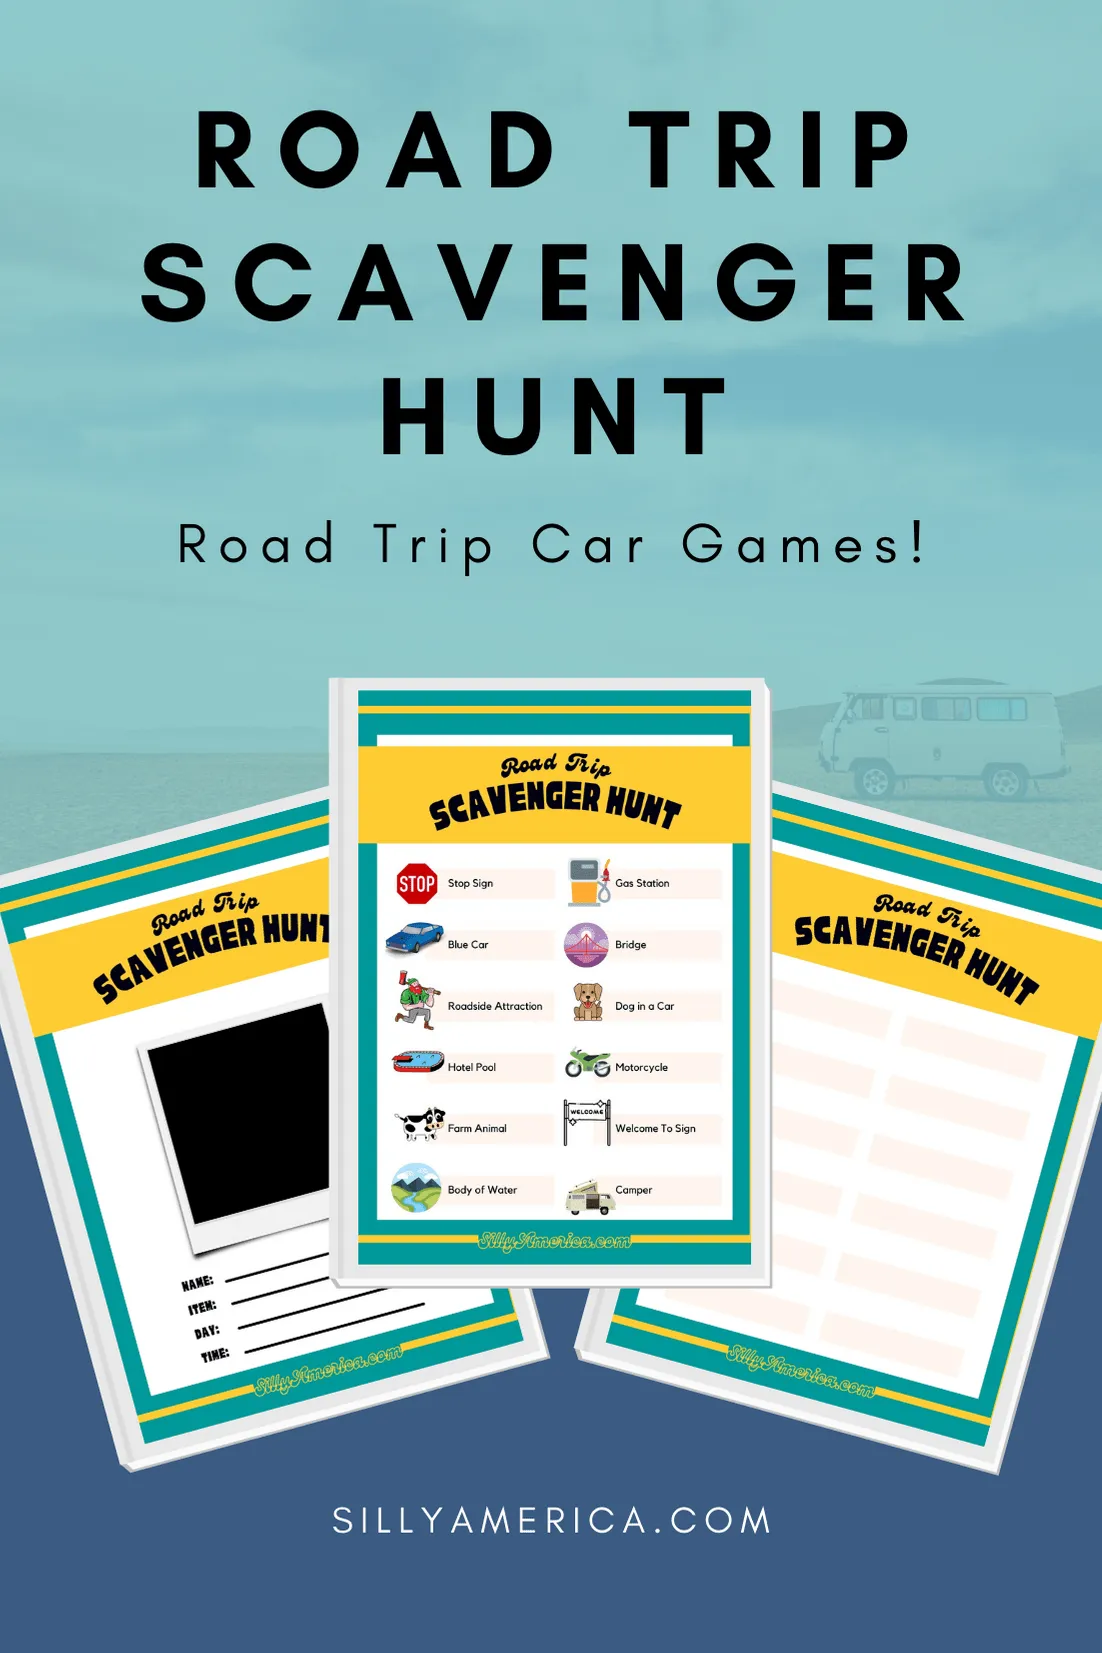 A road trip scavenger hunt is a fun game that keeps everyone in the car engaged! Print off a list of things to see on a road trip and keep your eyes peeled, and then award points for who sees the most and who sees what first. Play this fun road trip game on your next long car trip!  #RoadTripGames #RoadTripGamesForAdults #RoadTripGamesForTeens #RoadTripGamesForKids #FamilyRoadTripGames #RoadTripGamesF0rCouples #PrintableRoadTripGames #CarRides #RoadTripGamesWithFriends #DIYRoadTripGames 